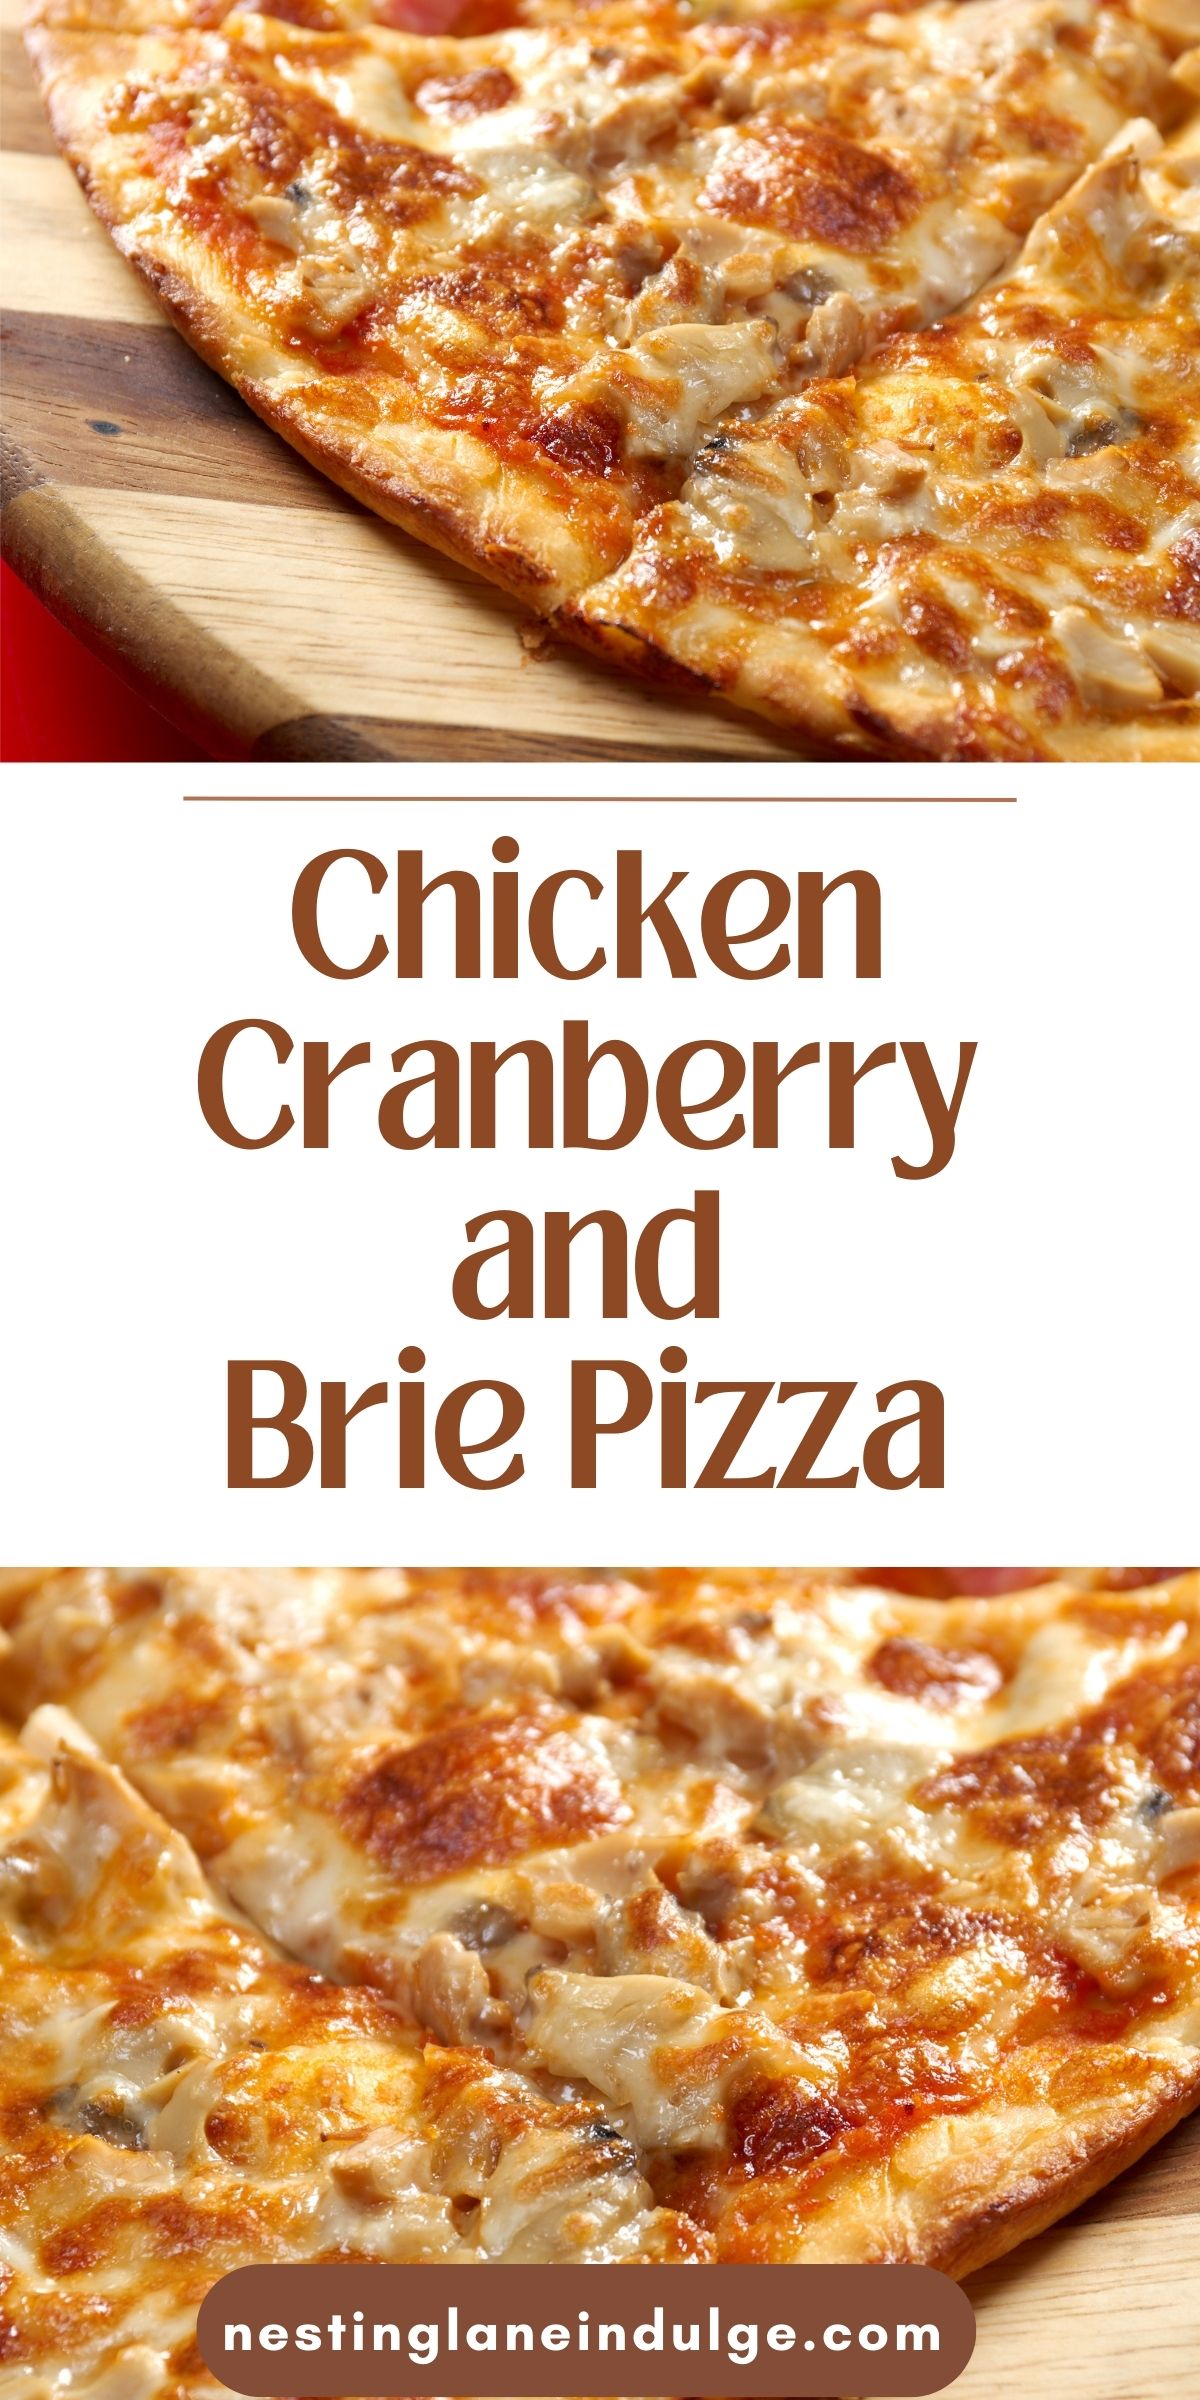 Chicken Cranberry and Brie Pizza Graphic.